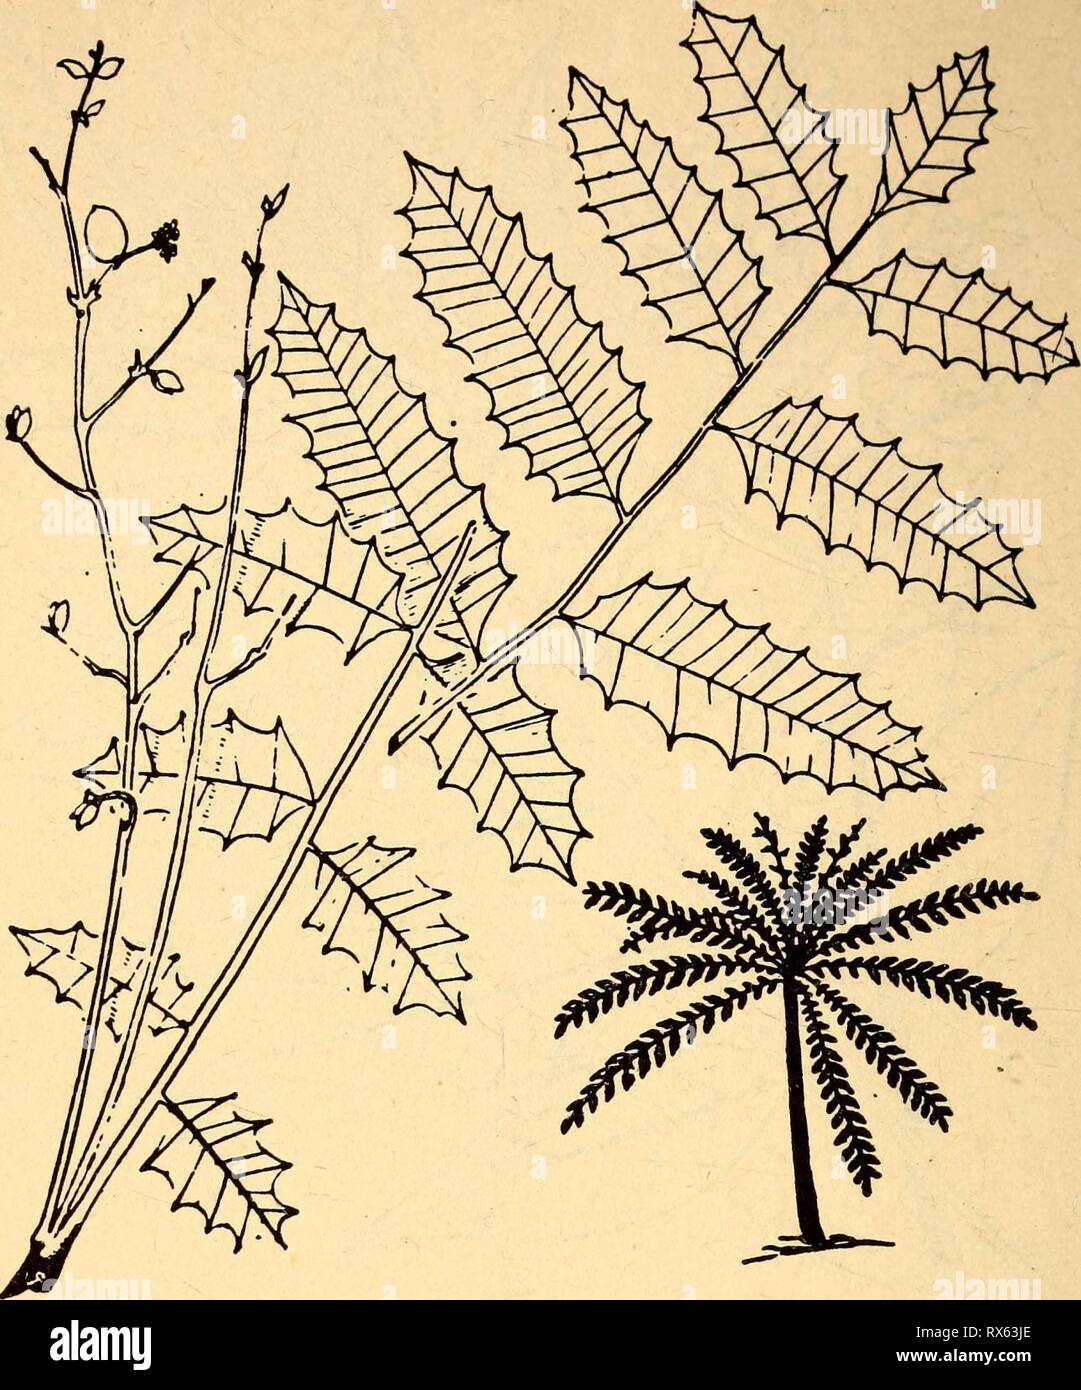 Edible and poisonous plants of Edible and poisonous plants of the Caribbean region ediblepoisonousp00dahl Year: 1944  80   62. Guao Comocladia POISON The sap of some species of this plant causes blistering and prolonged inflammation of the skin similar to that caused by poison ivy. Numerous varieties grow in Mexico, Guatemala and the West Indies. On the mainland, they are not found below Guatemala. These bushy or small trees have long leaf stems but only a few or no branches. The leaves (which are often very spiny), are clustered at the ends of the branches, and the flowers are small and green Stock Photo